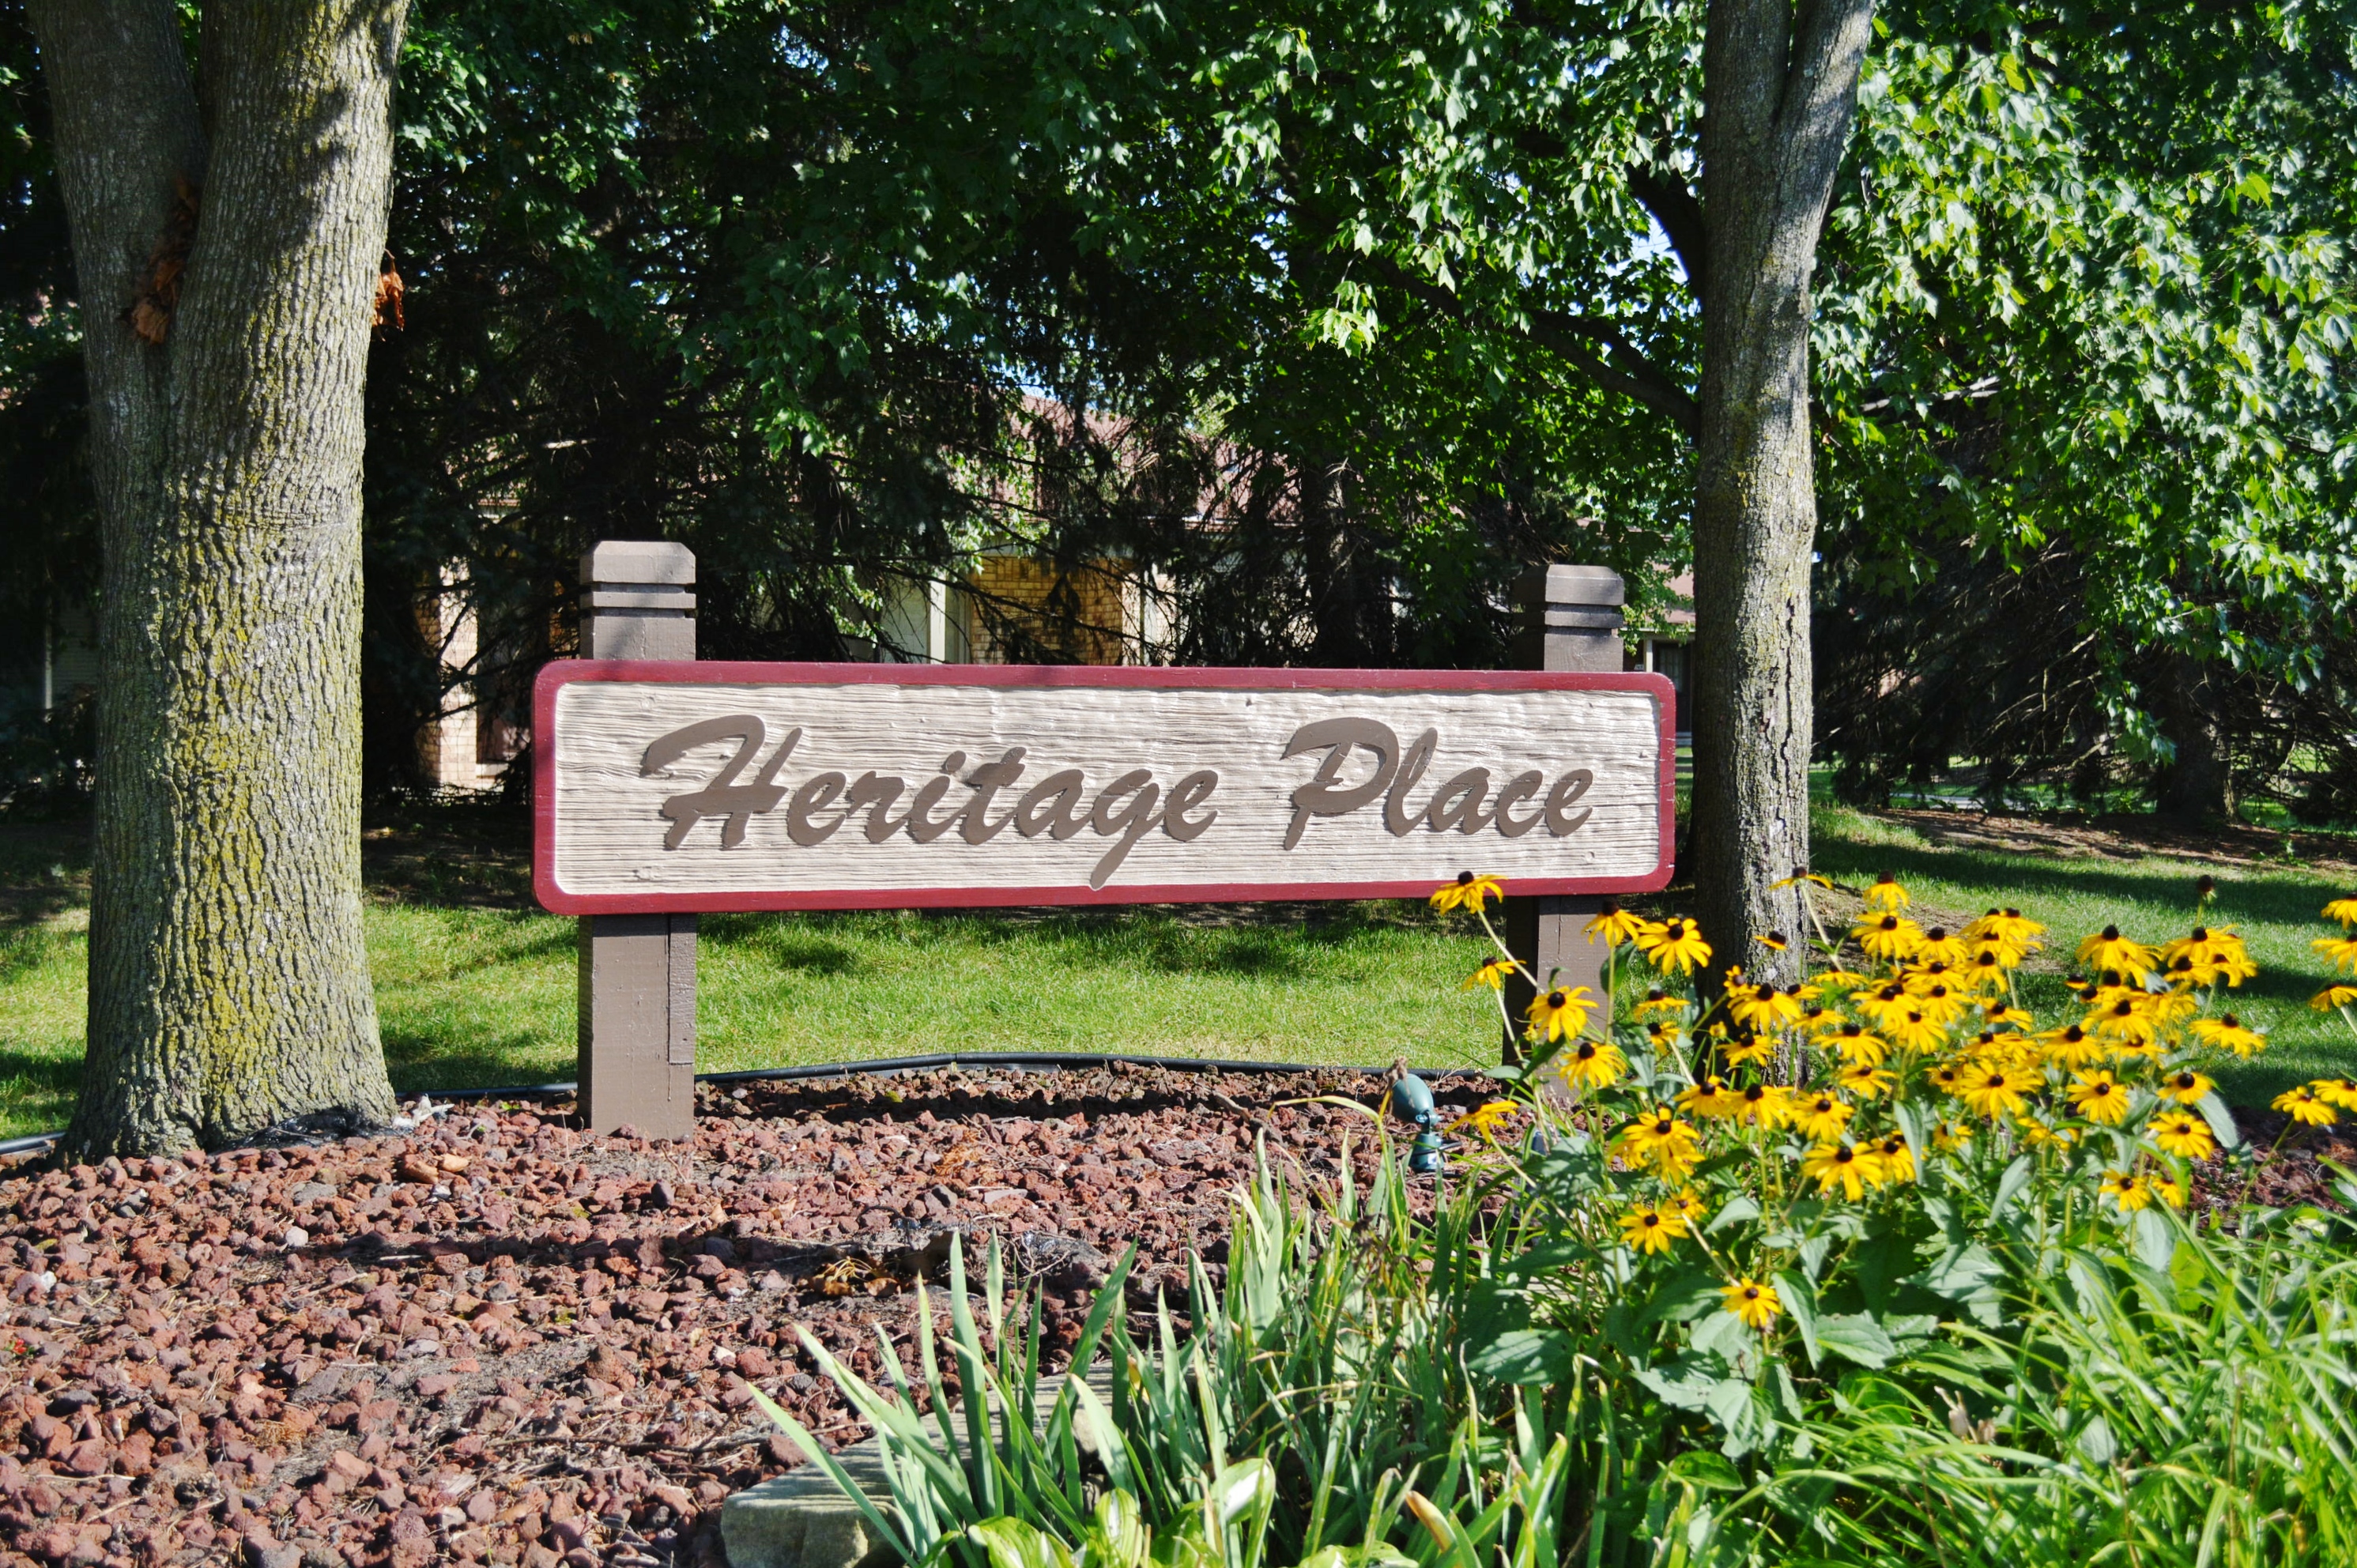 Heritage Place Condos for Sale - Shelby Township